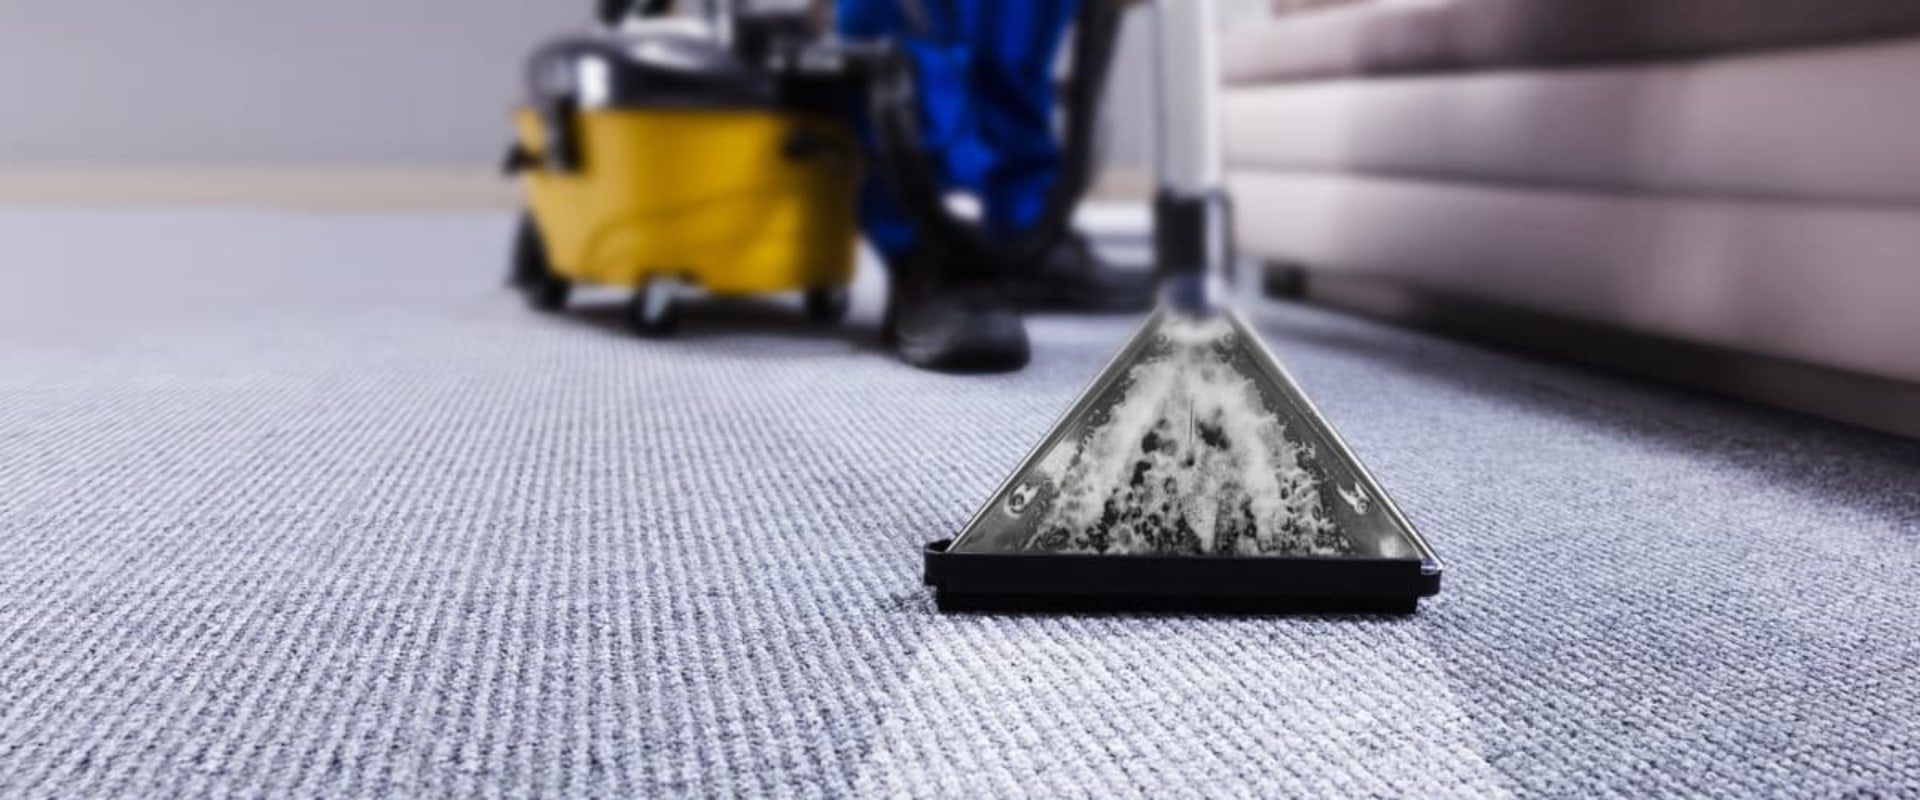 How do you clean carpet without soaking it?